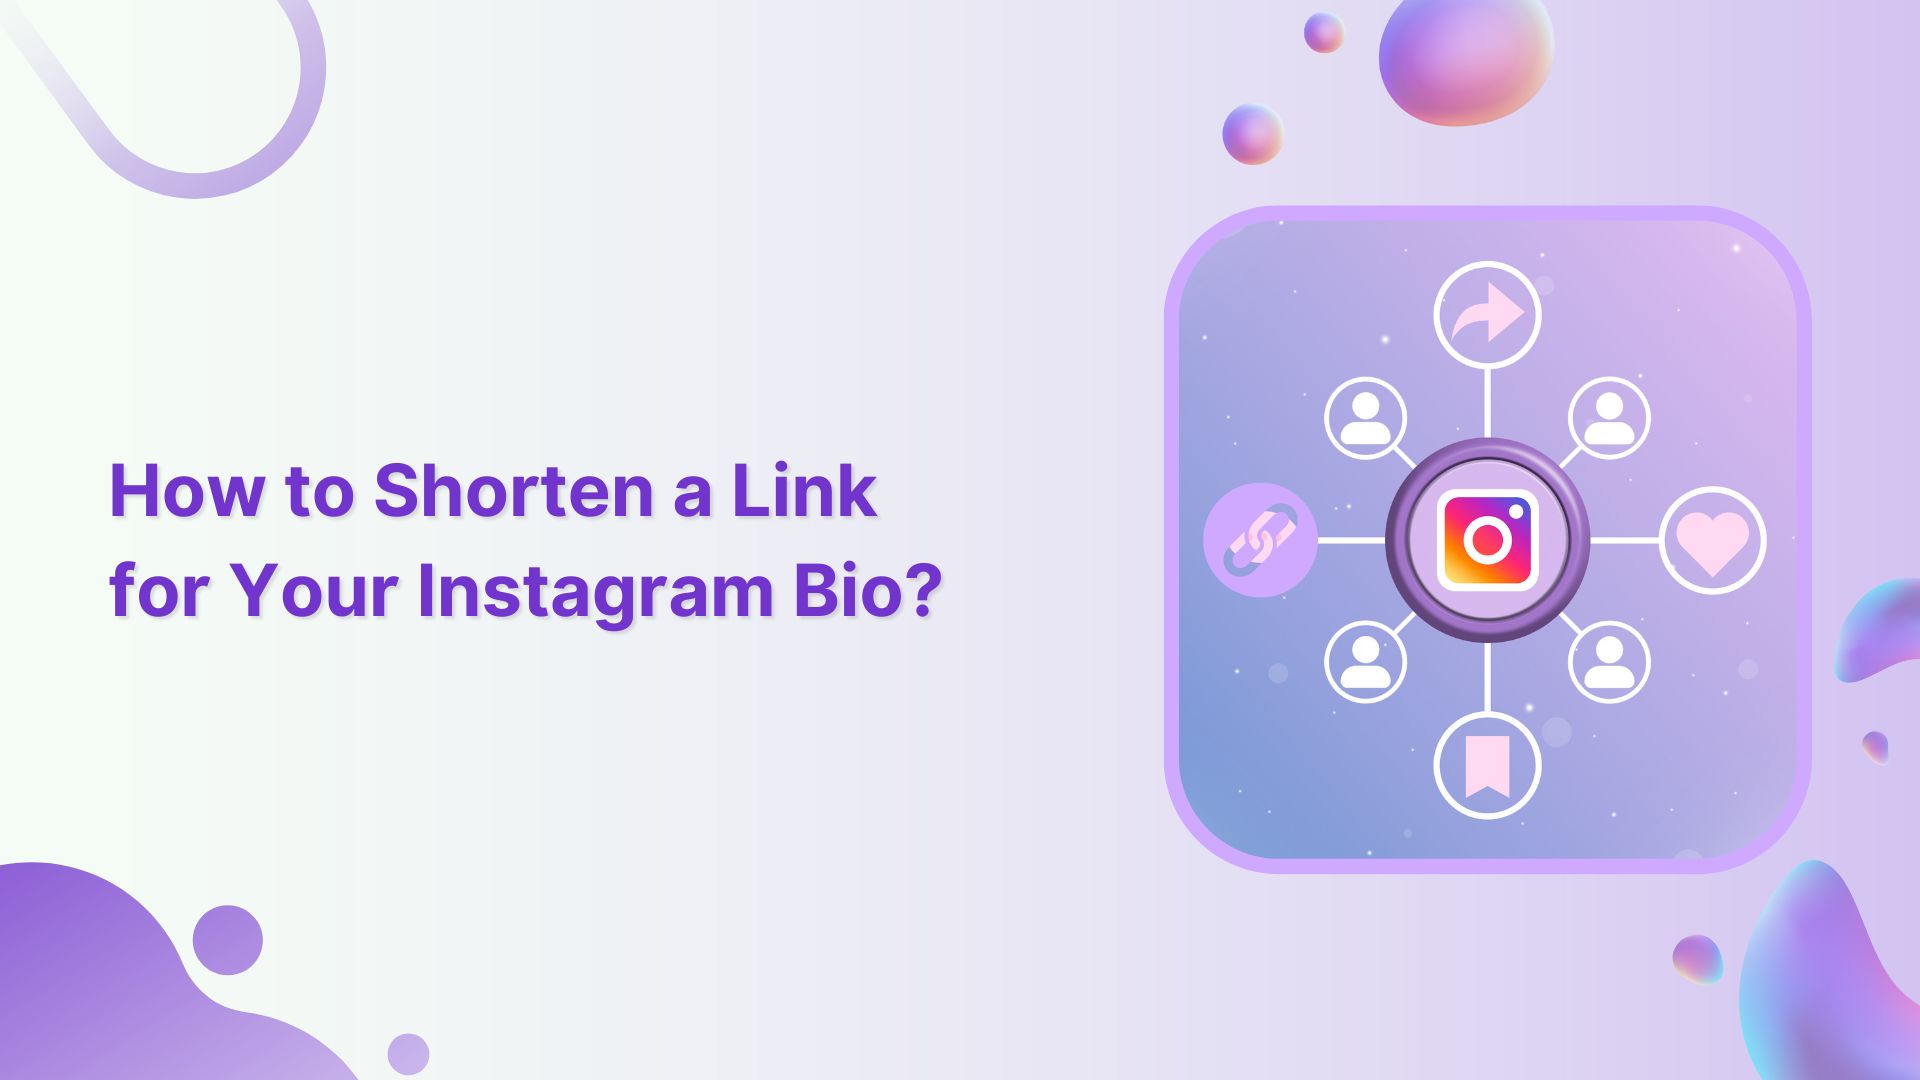 How to Shorten a Link for Instagram Bio: Step-by-Step Guide